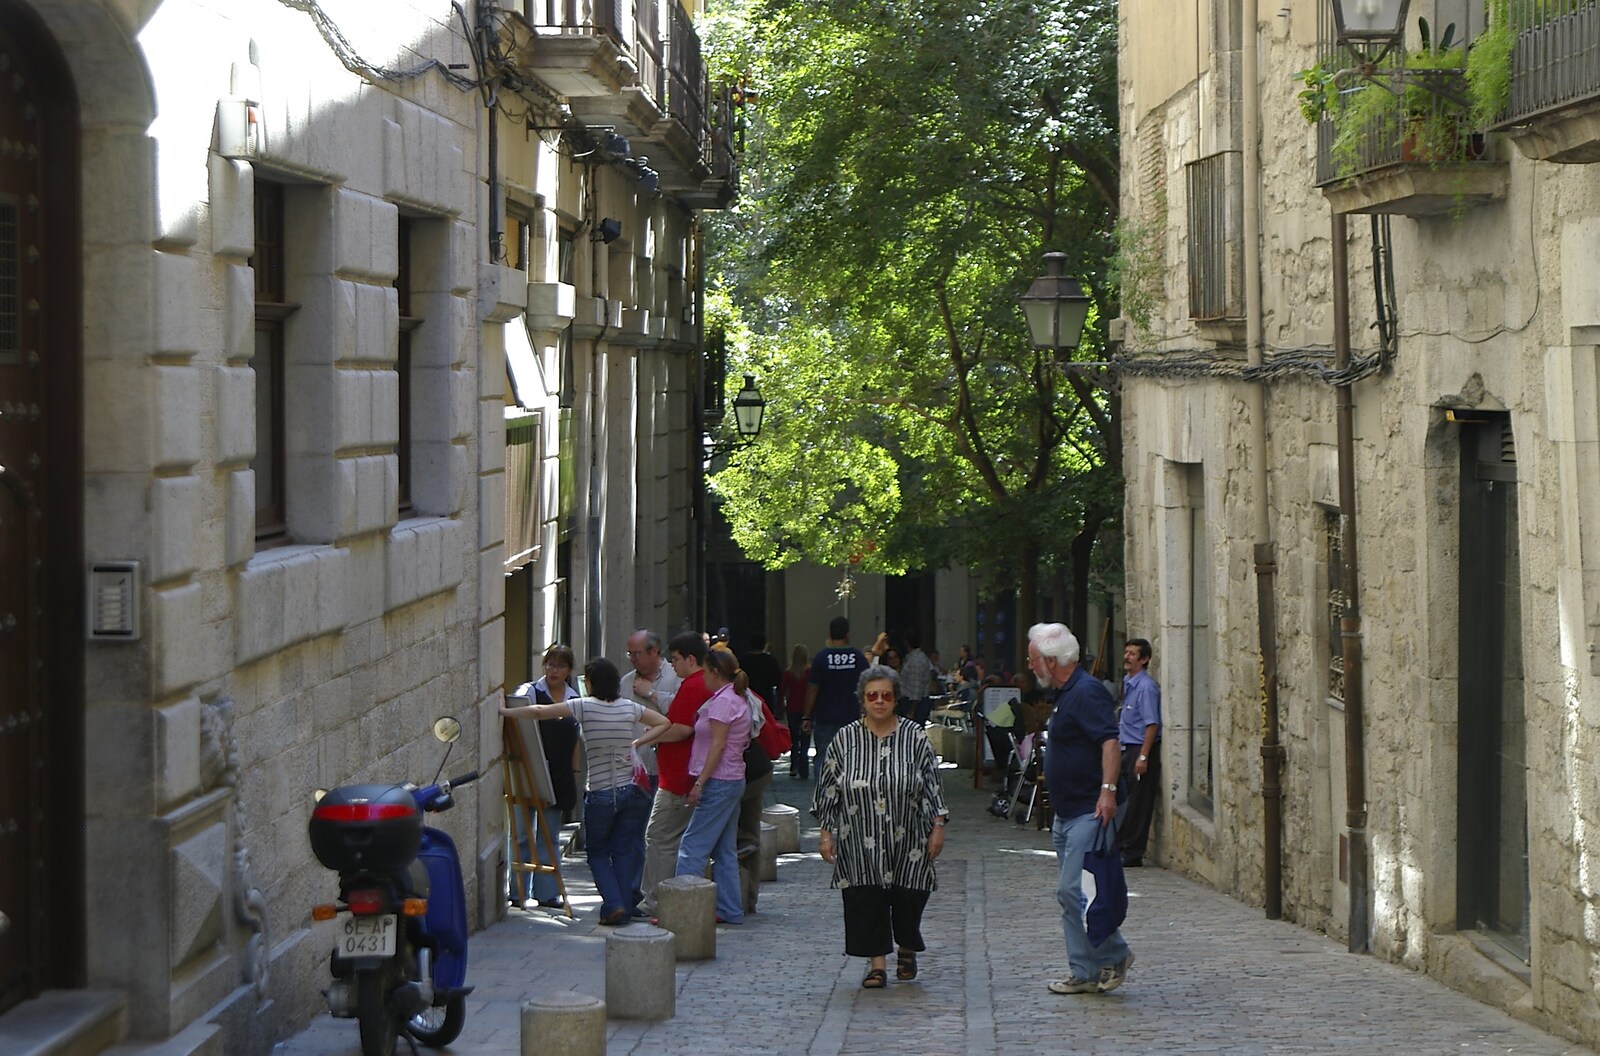 People milling around on the streets from Girona, Catalunya, Spain - 17th September 2006